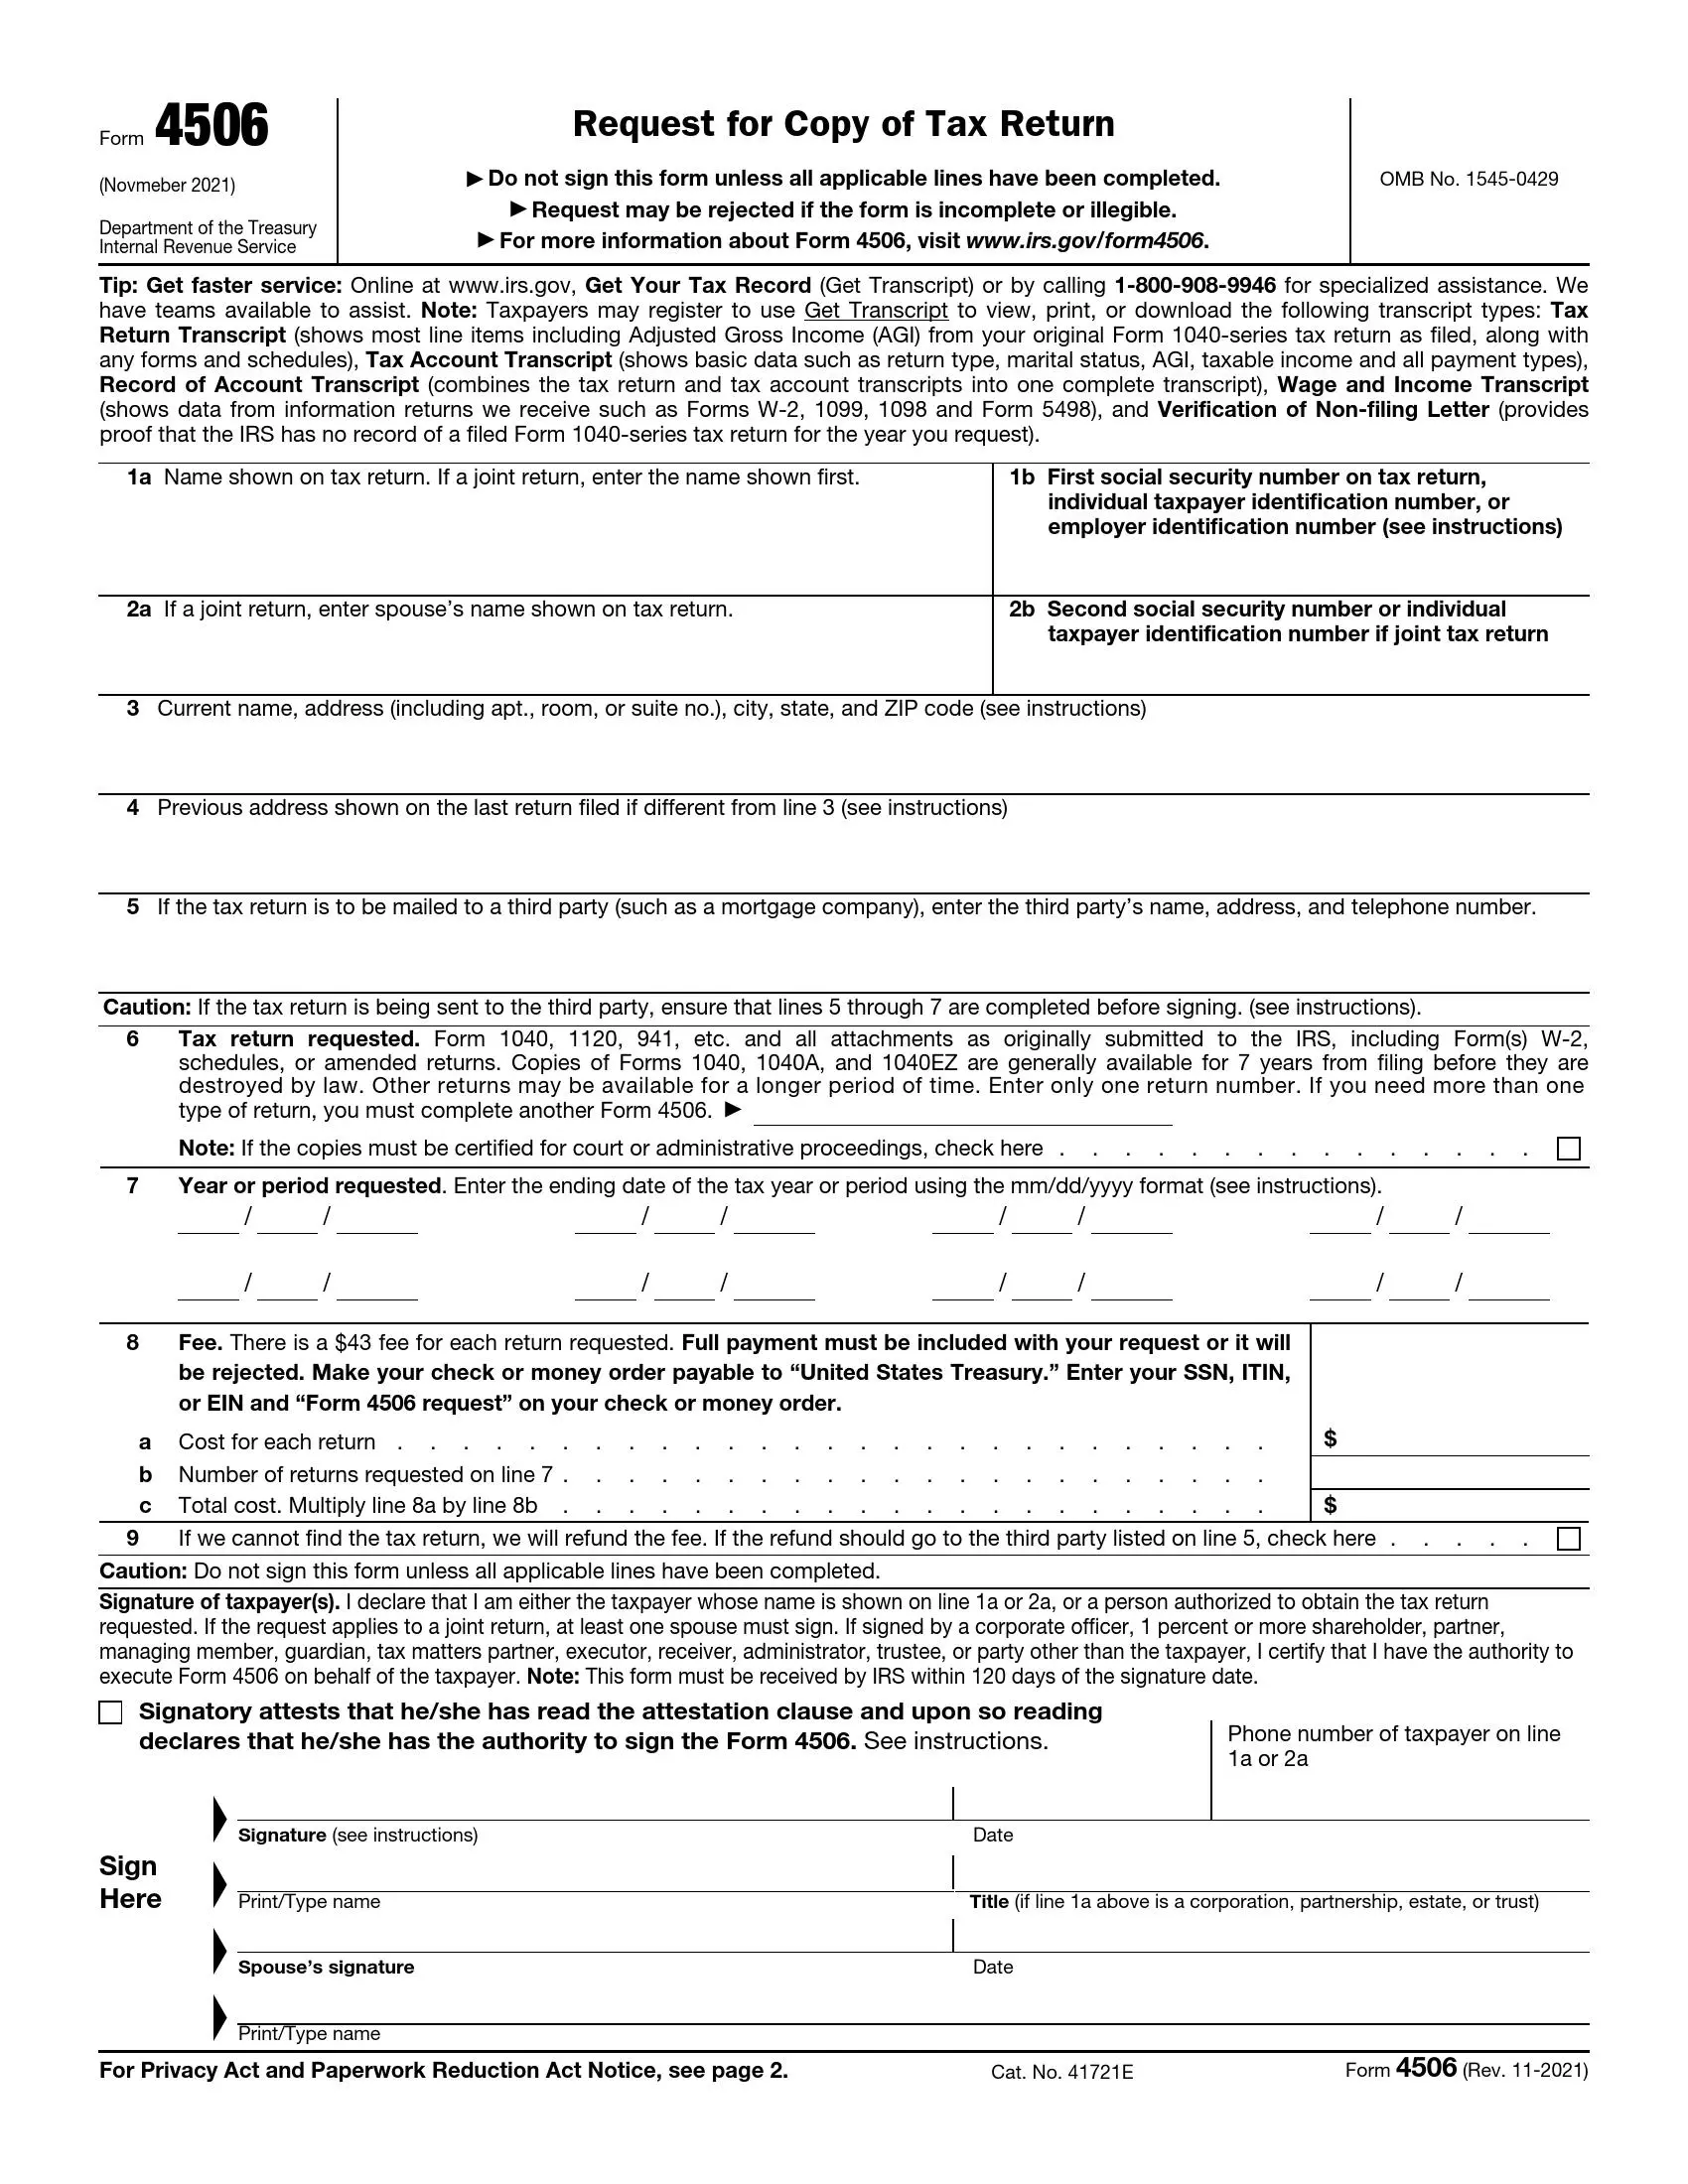 irs form 4506 rev 11 2021 preview